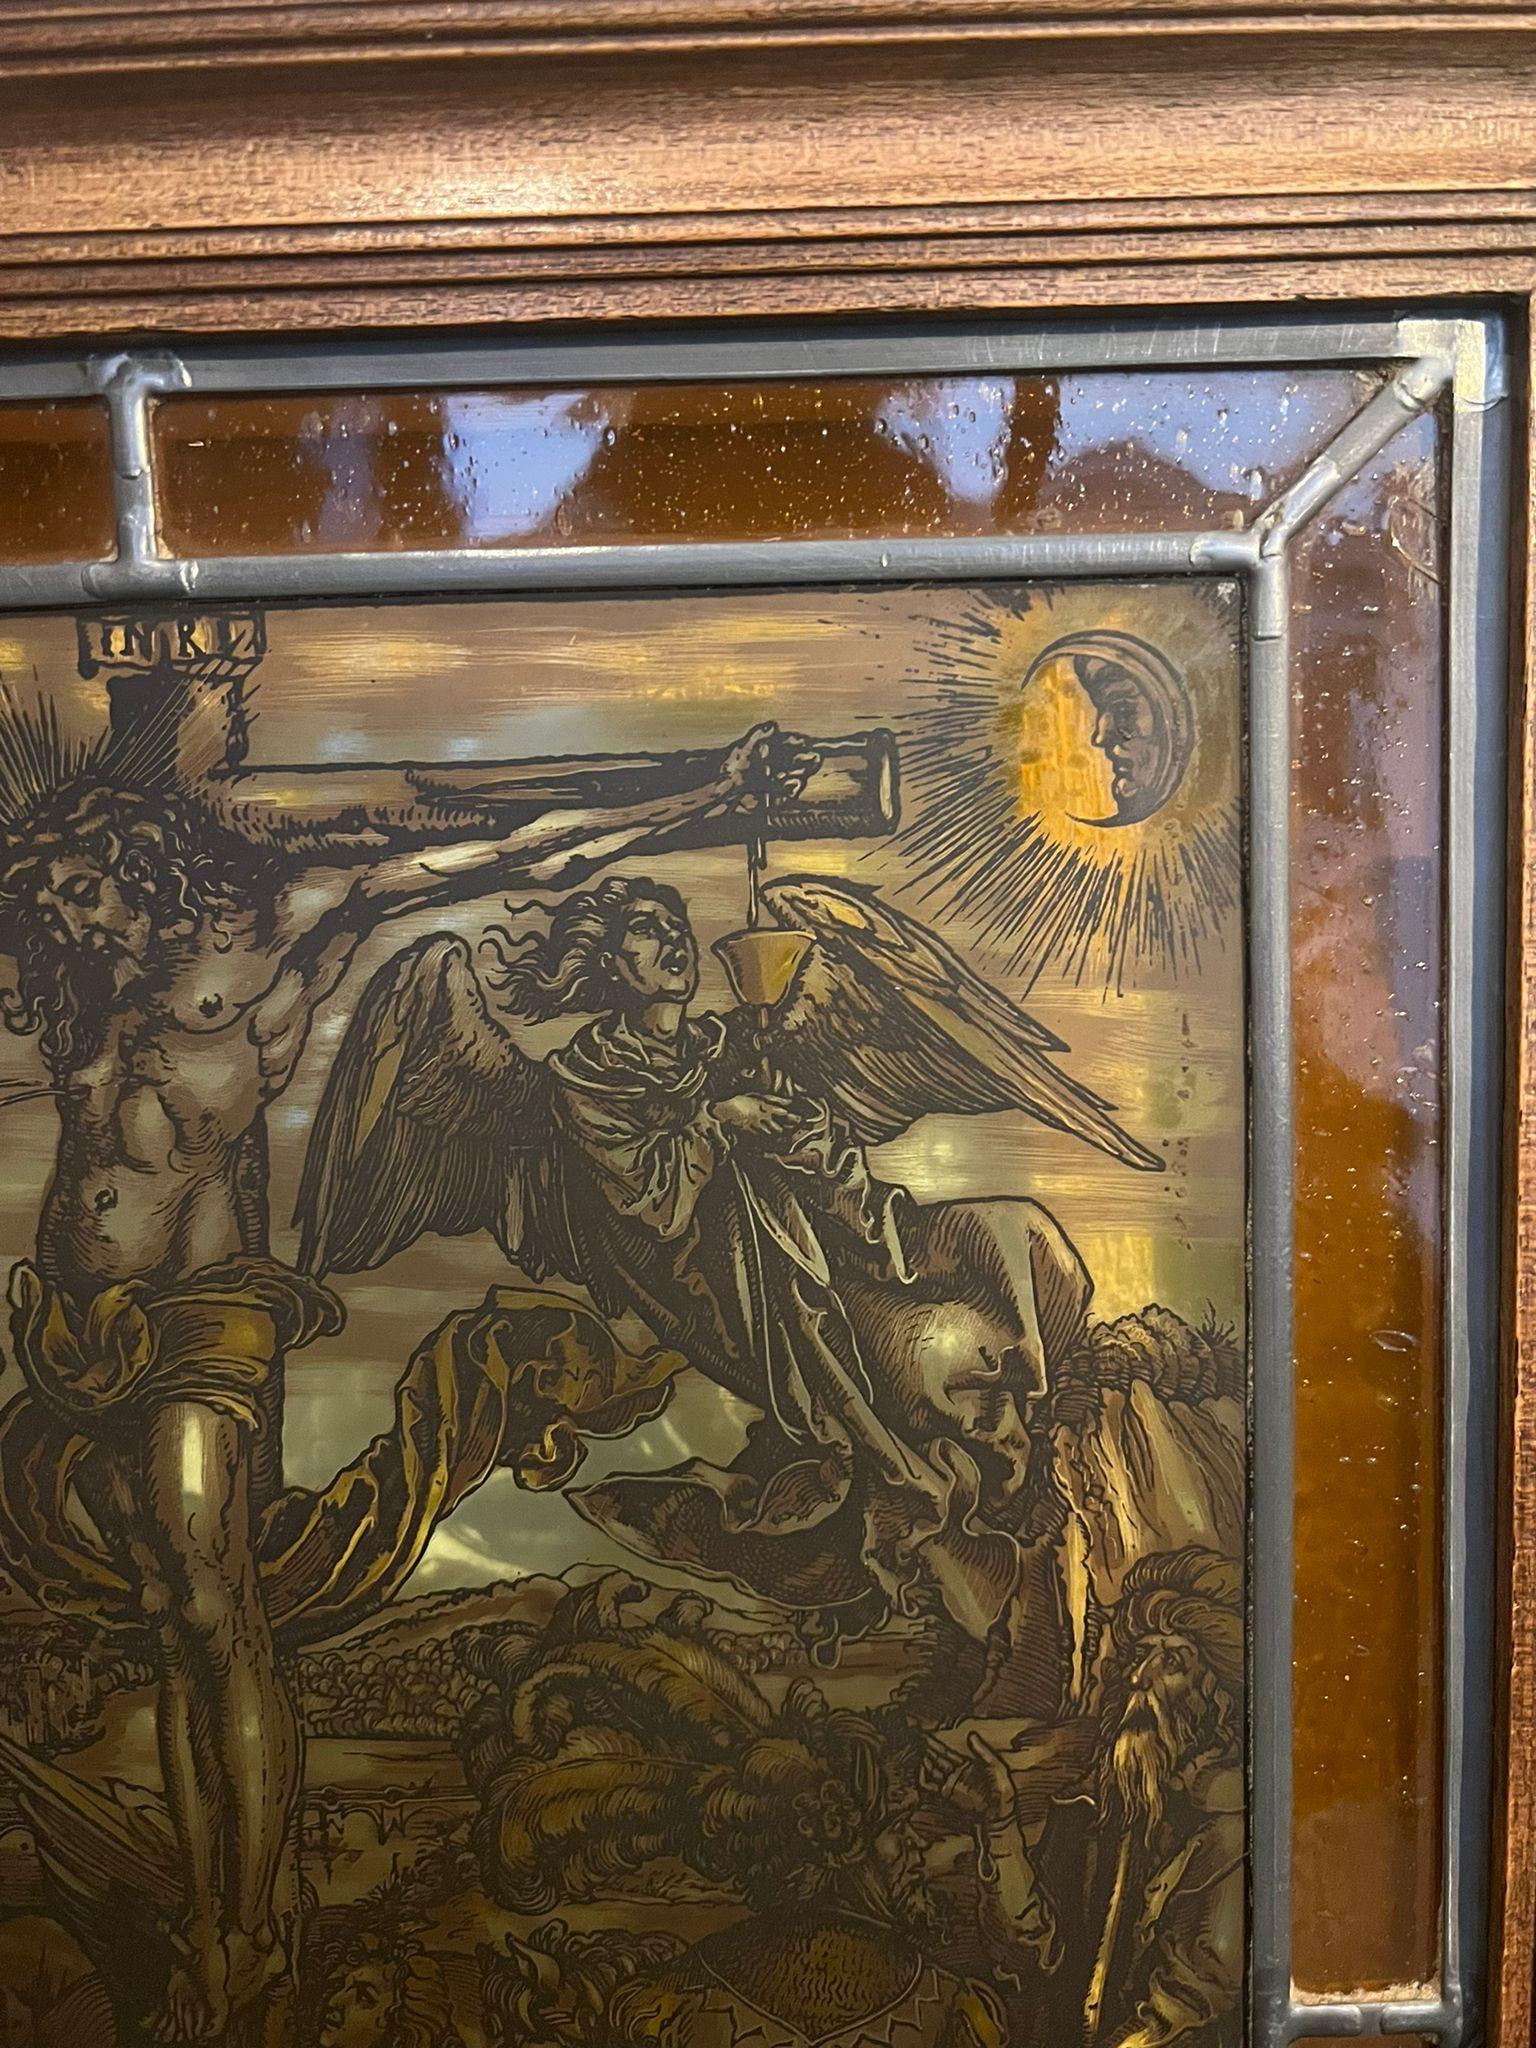 Rare pair of backlit glass panels, with wooden frame depicting two of the most beautiful engravings by Albrecht Dürer. Polloni glassware, early 20th century.

One of the two presents a restoration that is not visible.